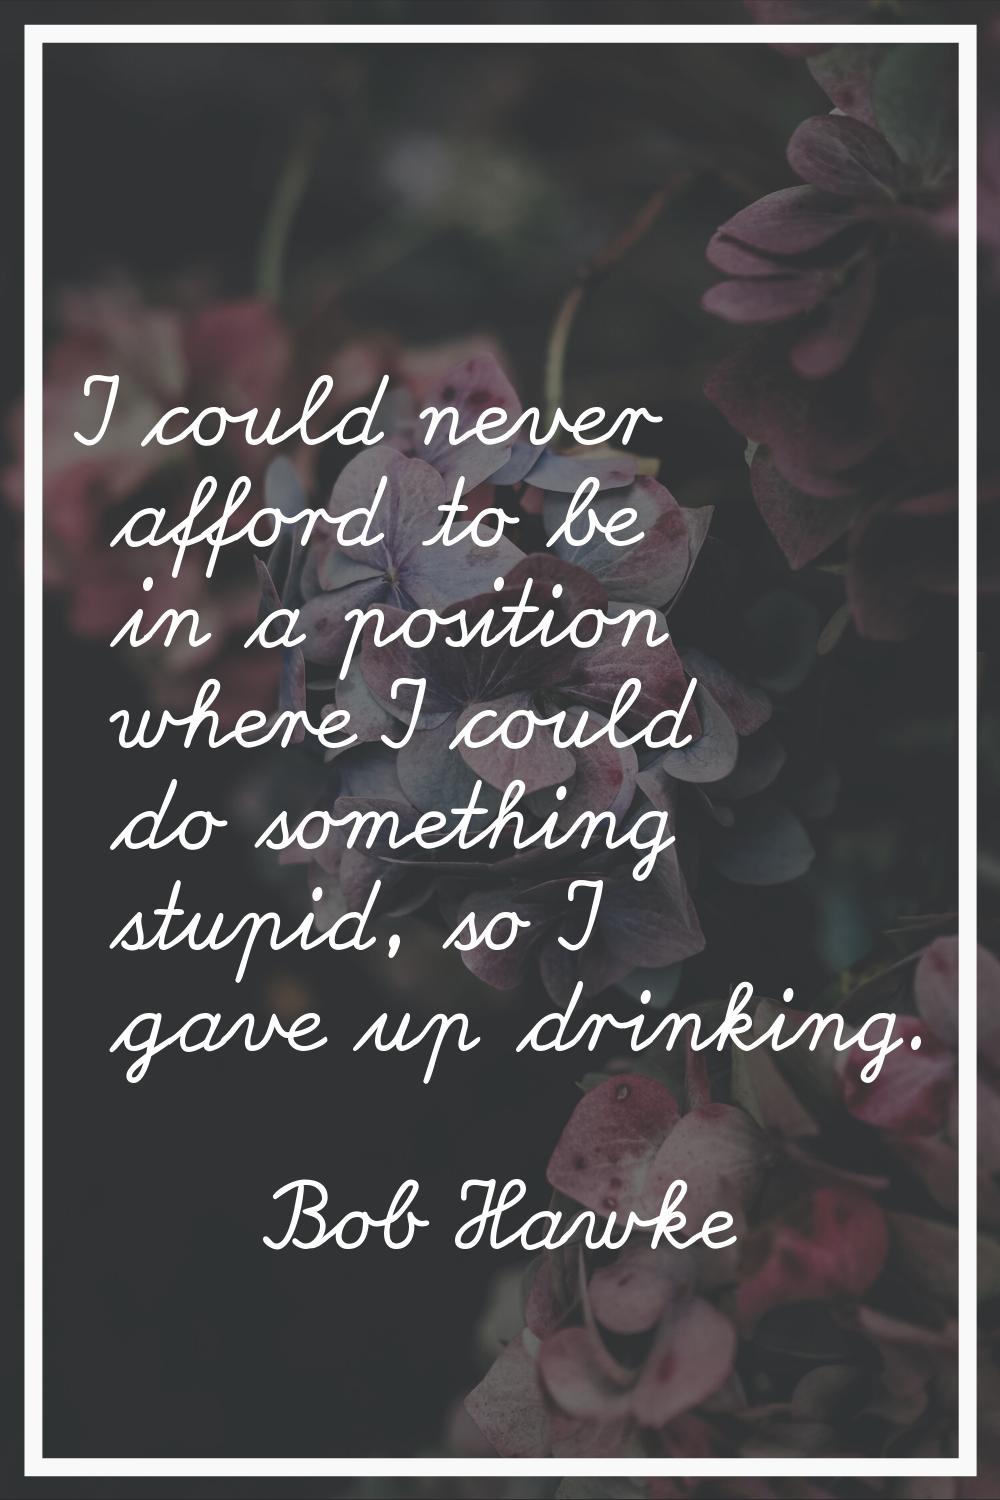 I could never afford to be in a position where I could do something stupid, so I gave up drinking.